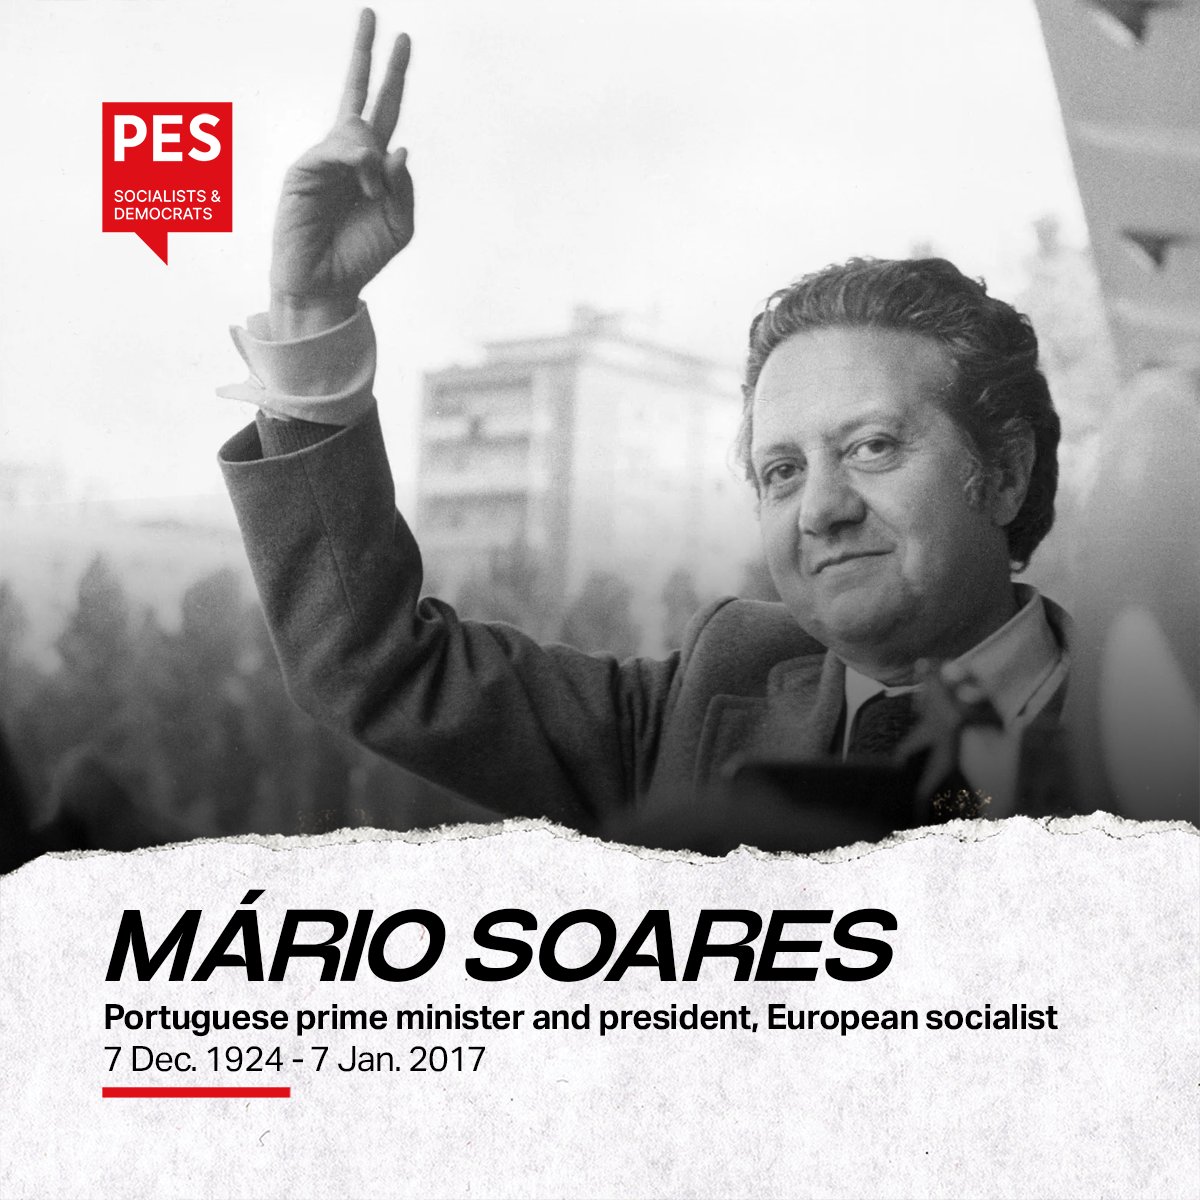 Today we remember #MárioSoares, historic leader of @psocialista and a fighter against the dictatorship that ruled Portugal for almost 50 years. His legacy lives today in a democratic and modern state and in the Portuguese commitment to the European ideal.